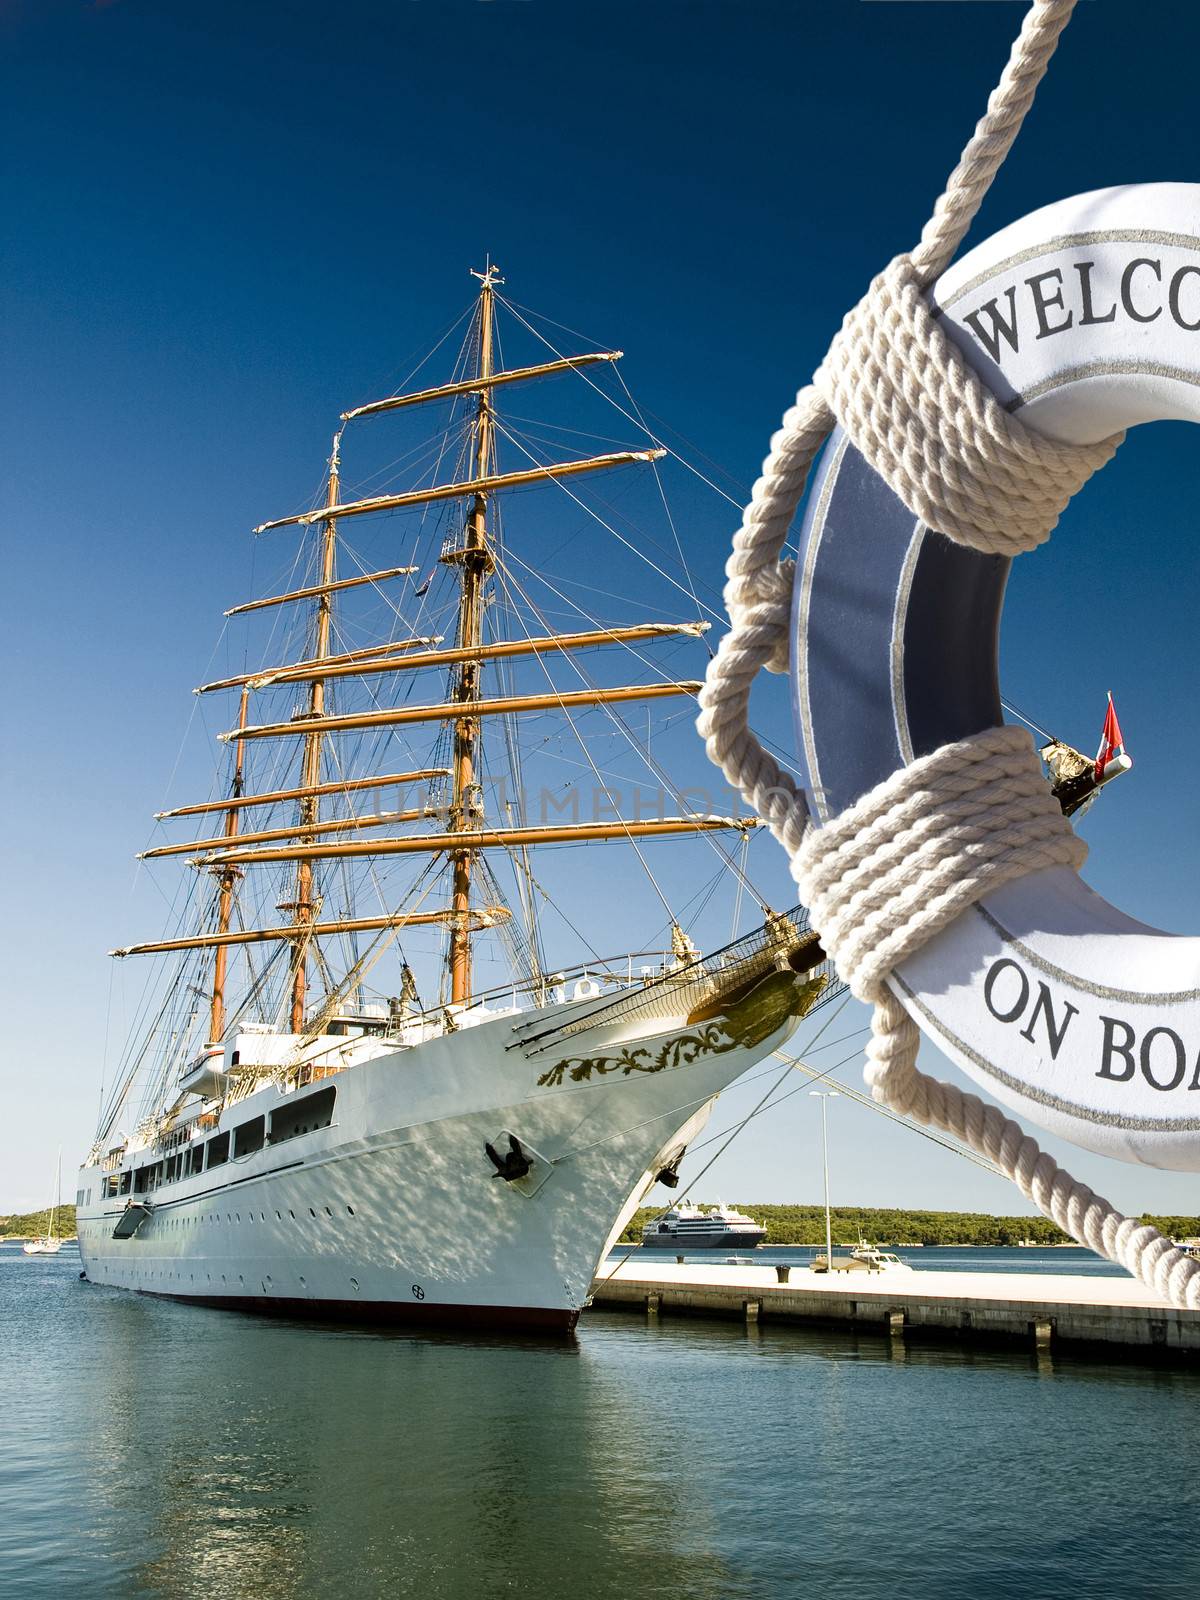 view on the sailing ship thrue blue safe belt with welcome on board sign